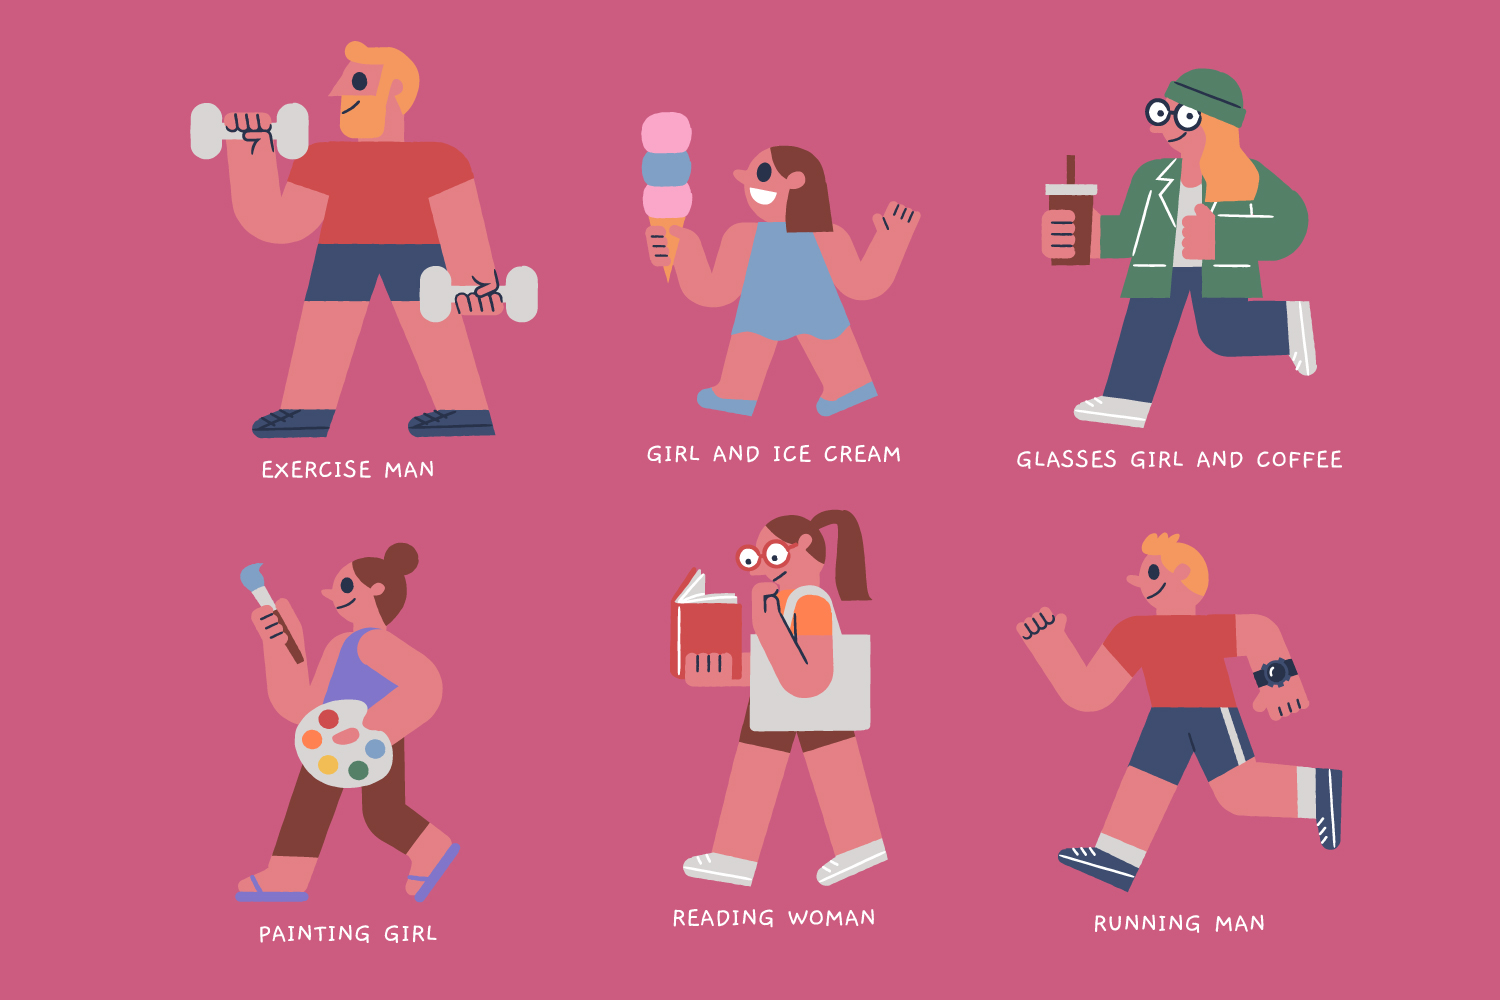 Series of illustrations of people doing different activities.